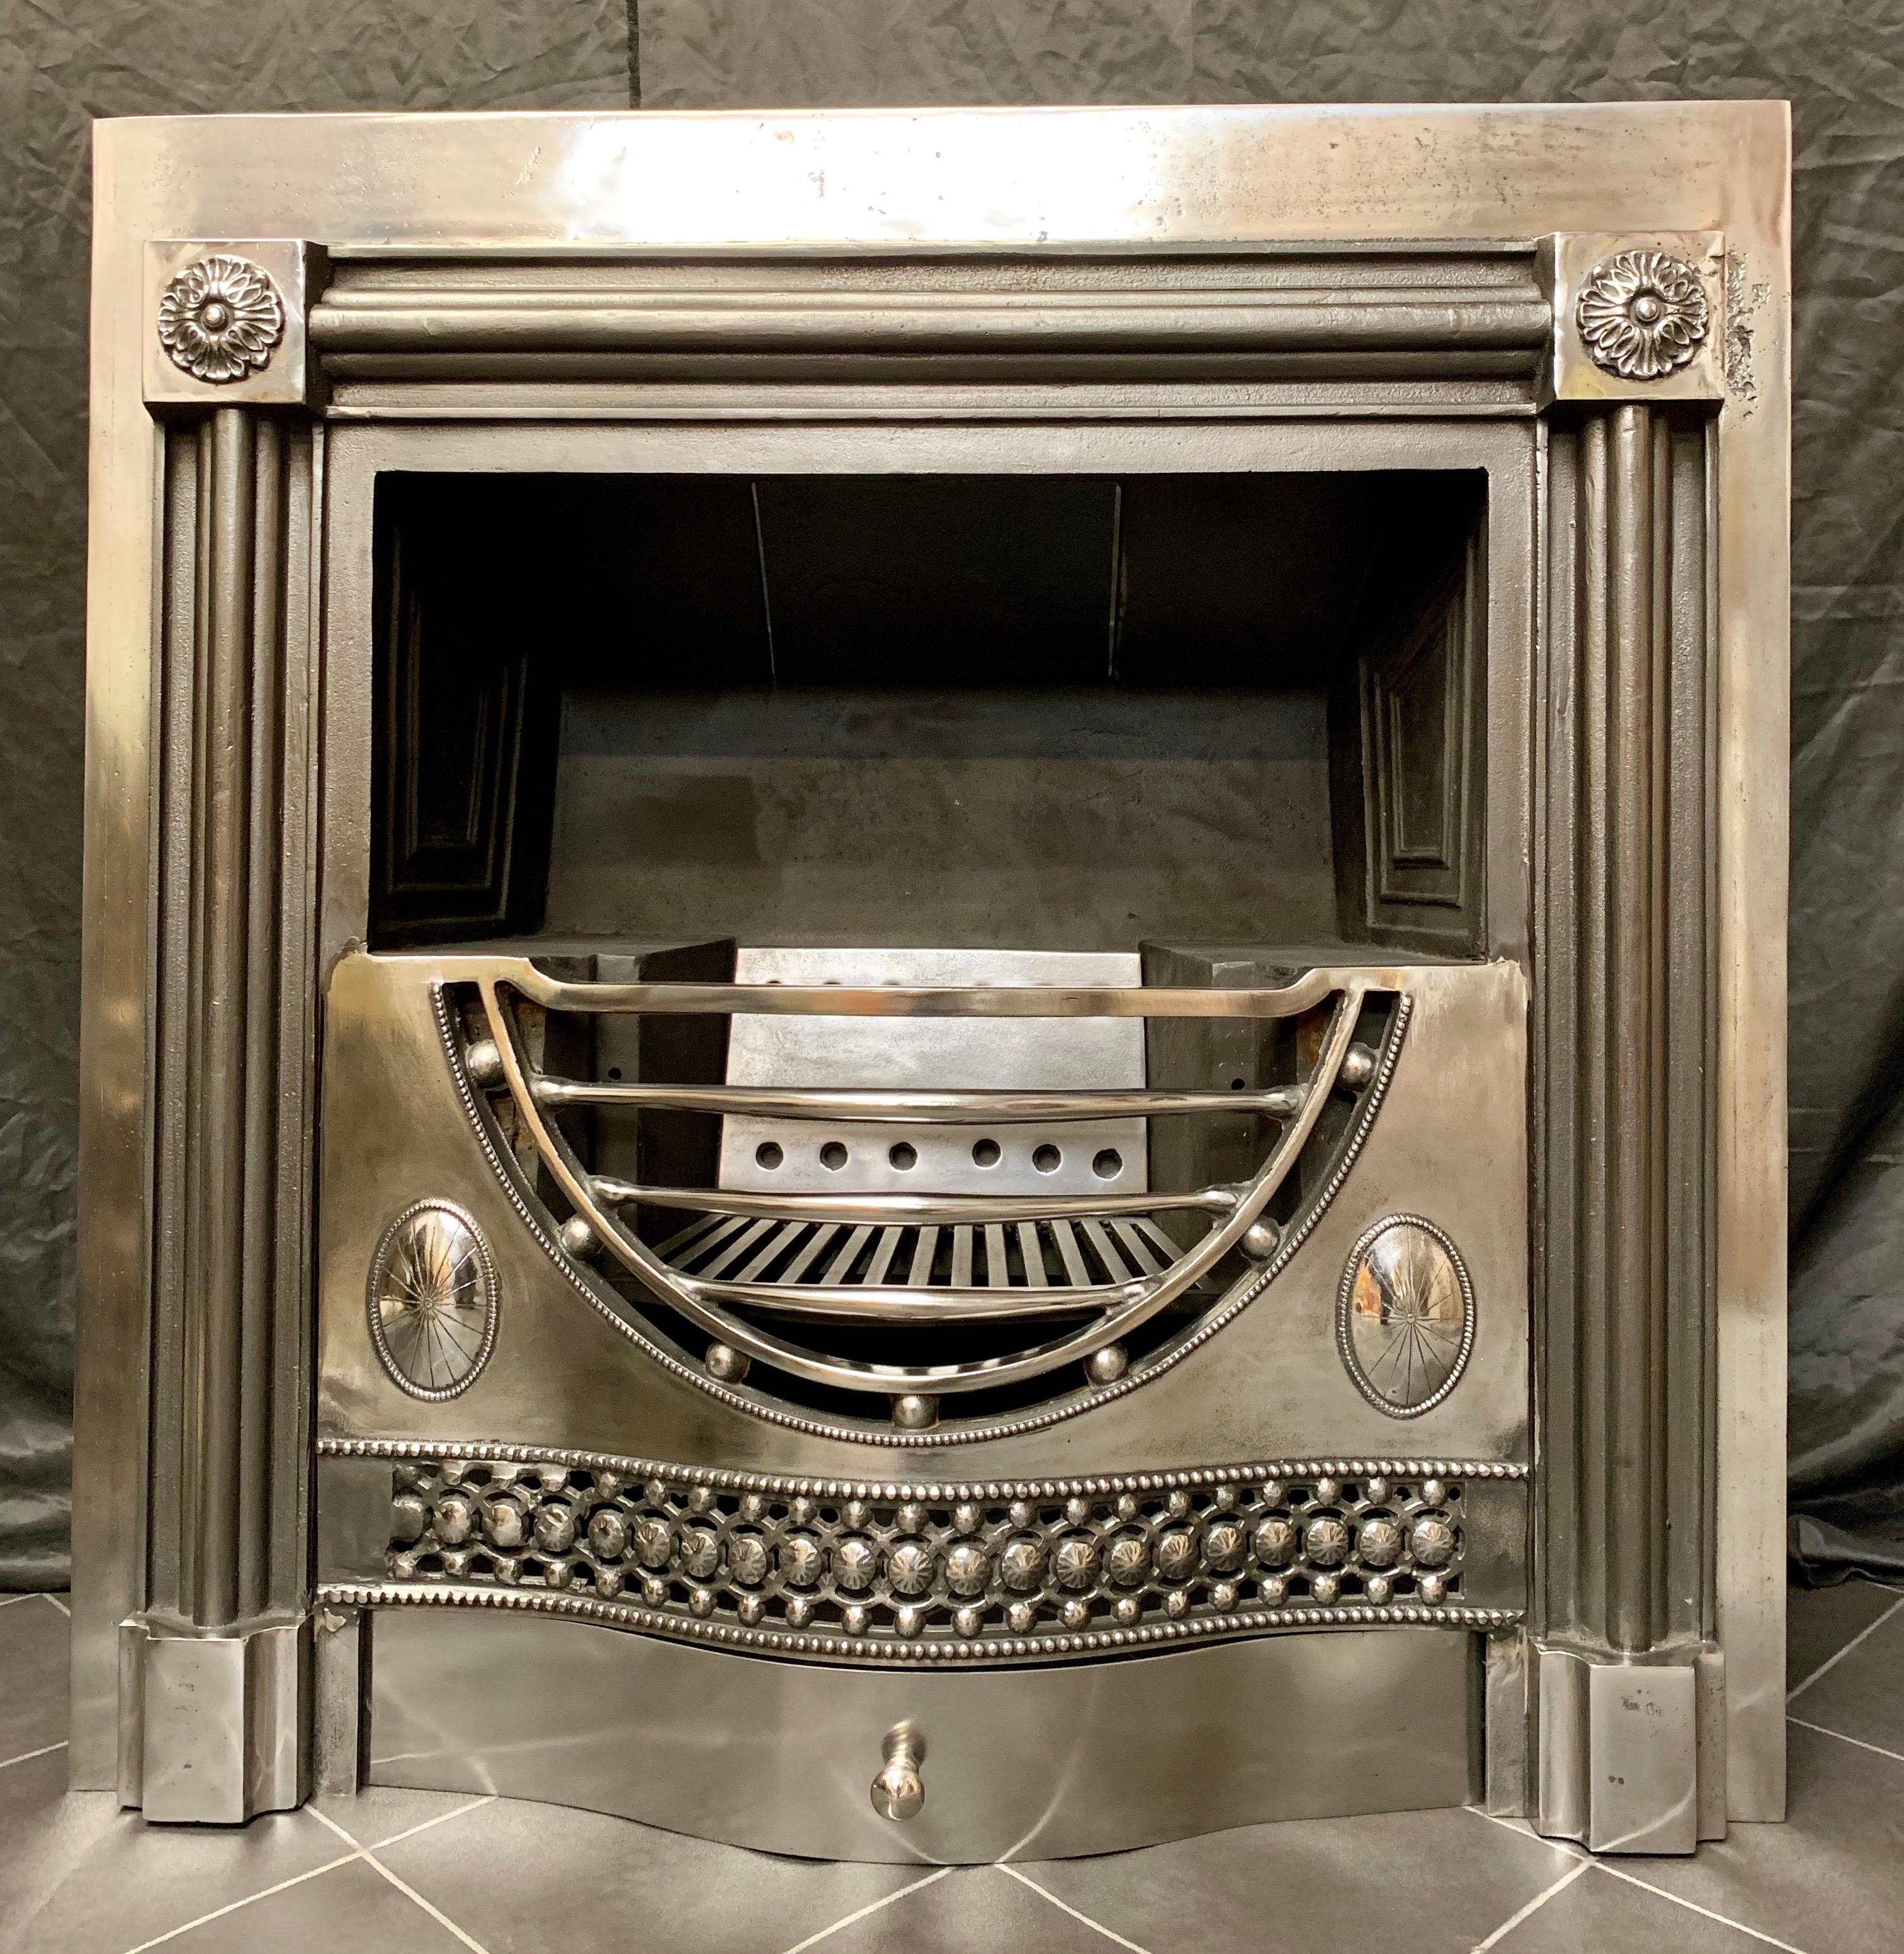 An important late Victorian Period -Georgian Style Polished Register Hob Grate Fireplace Insert of superb quality, in the manor of Robert Adam with integral 'ducks nest' hob grate and a four barred serpentine fire front, with seven cushion spacers.